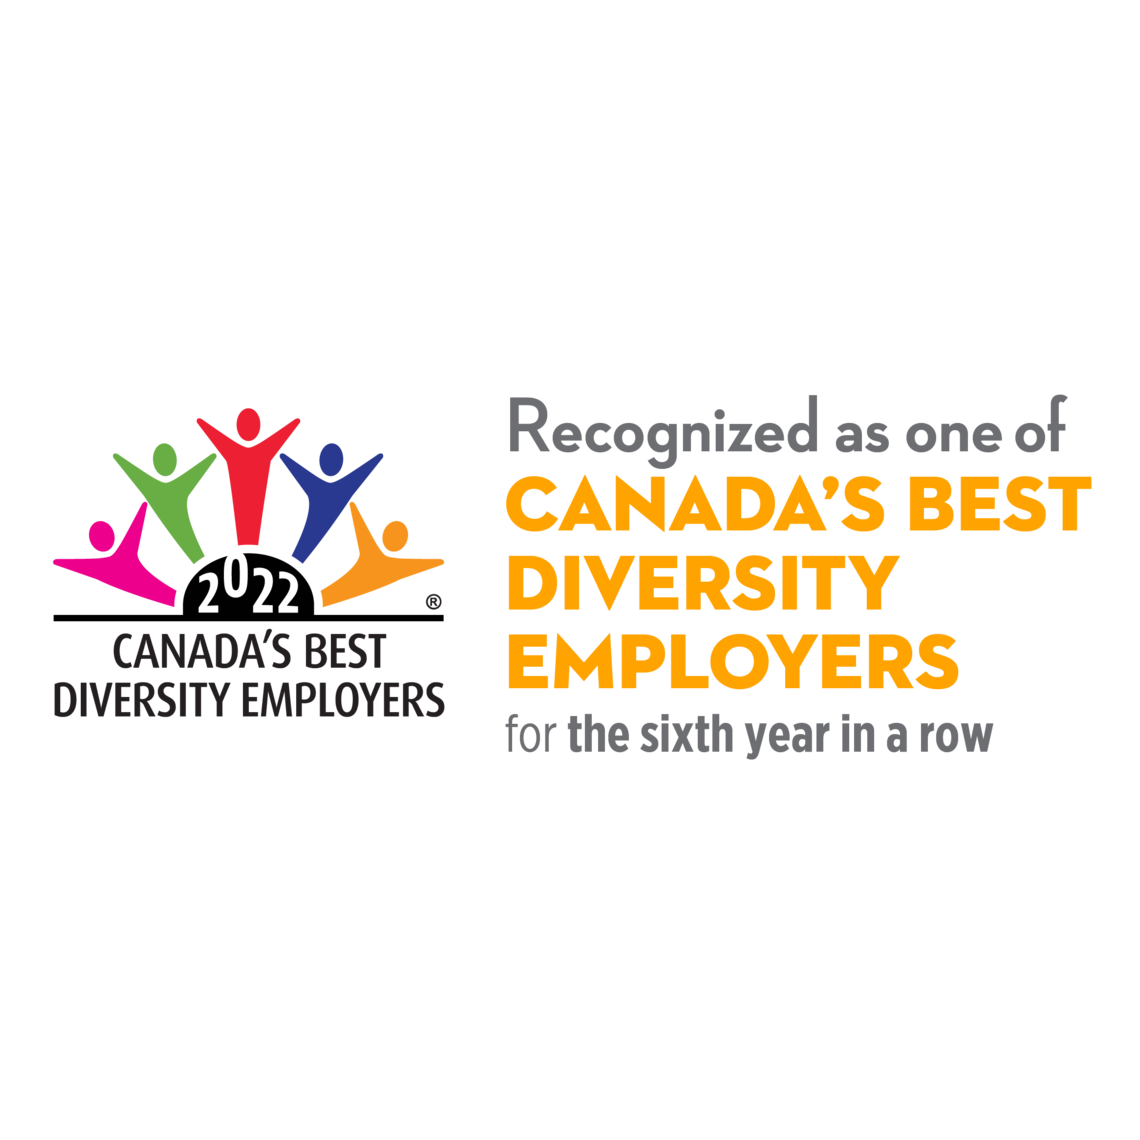 Canada's best diversity employer for 6 years in a row